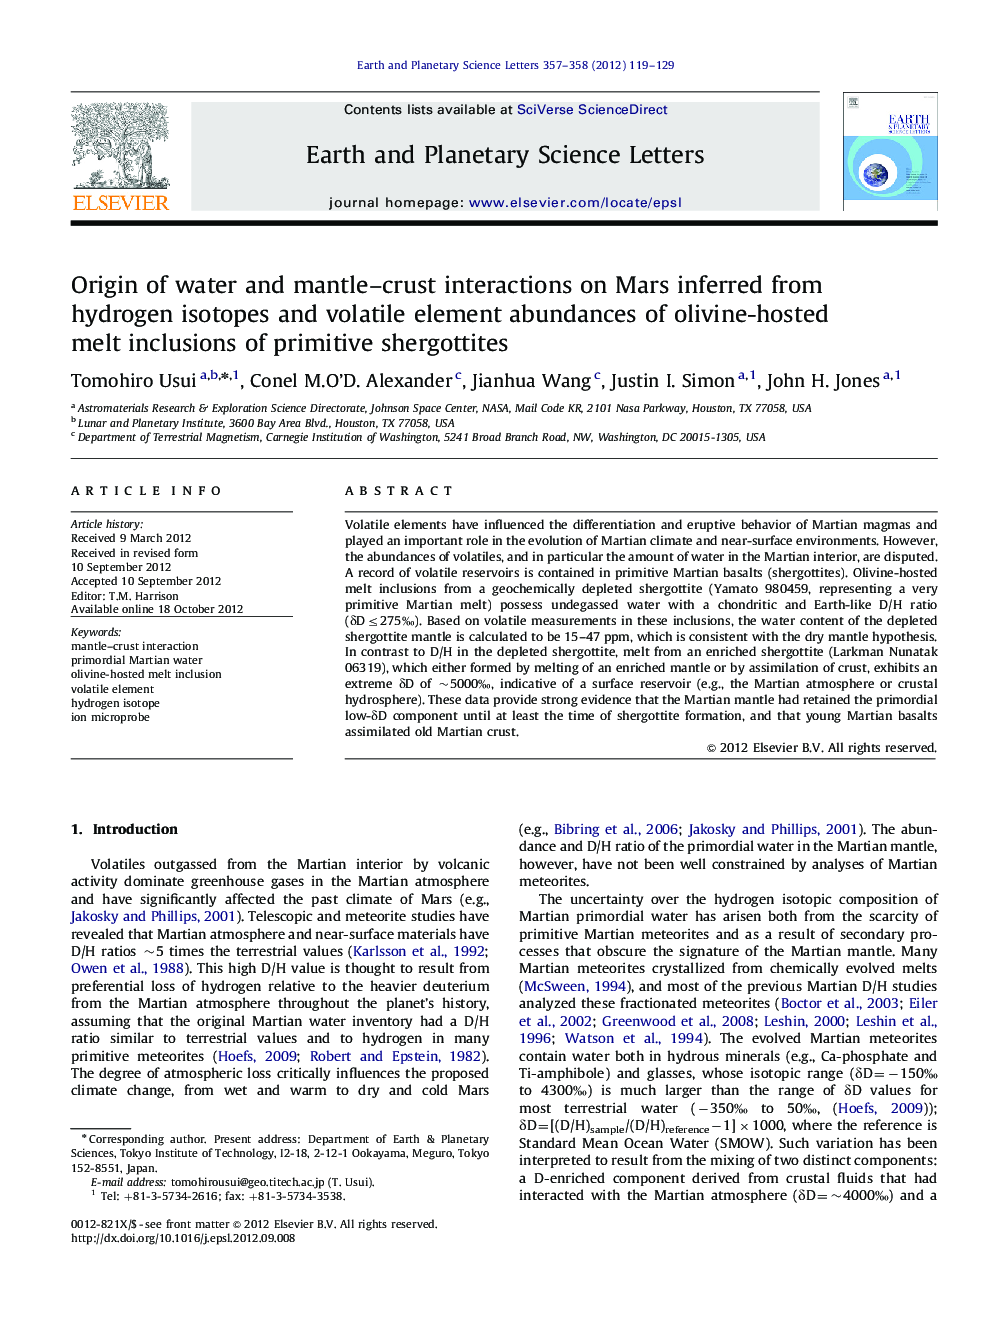 Origin of water and mantle–crust interactions on Mars inferred from hydrogen isotopes and volatile element abundances of olivine-hosted melt inclusions of primitive shergottites